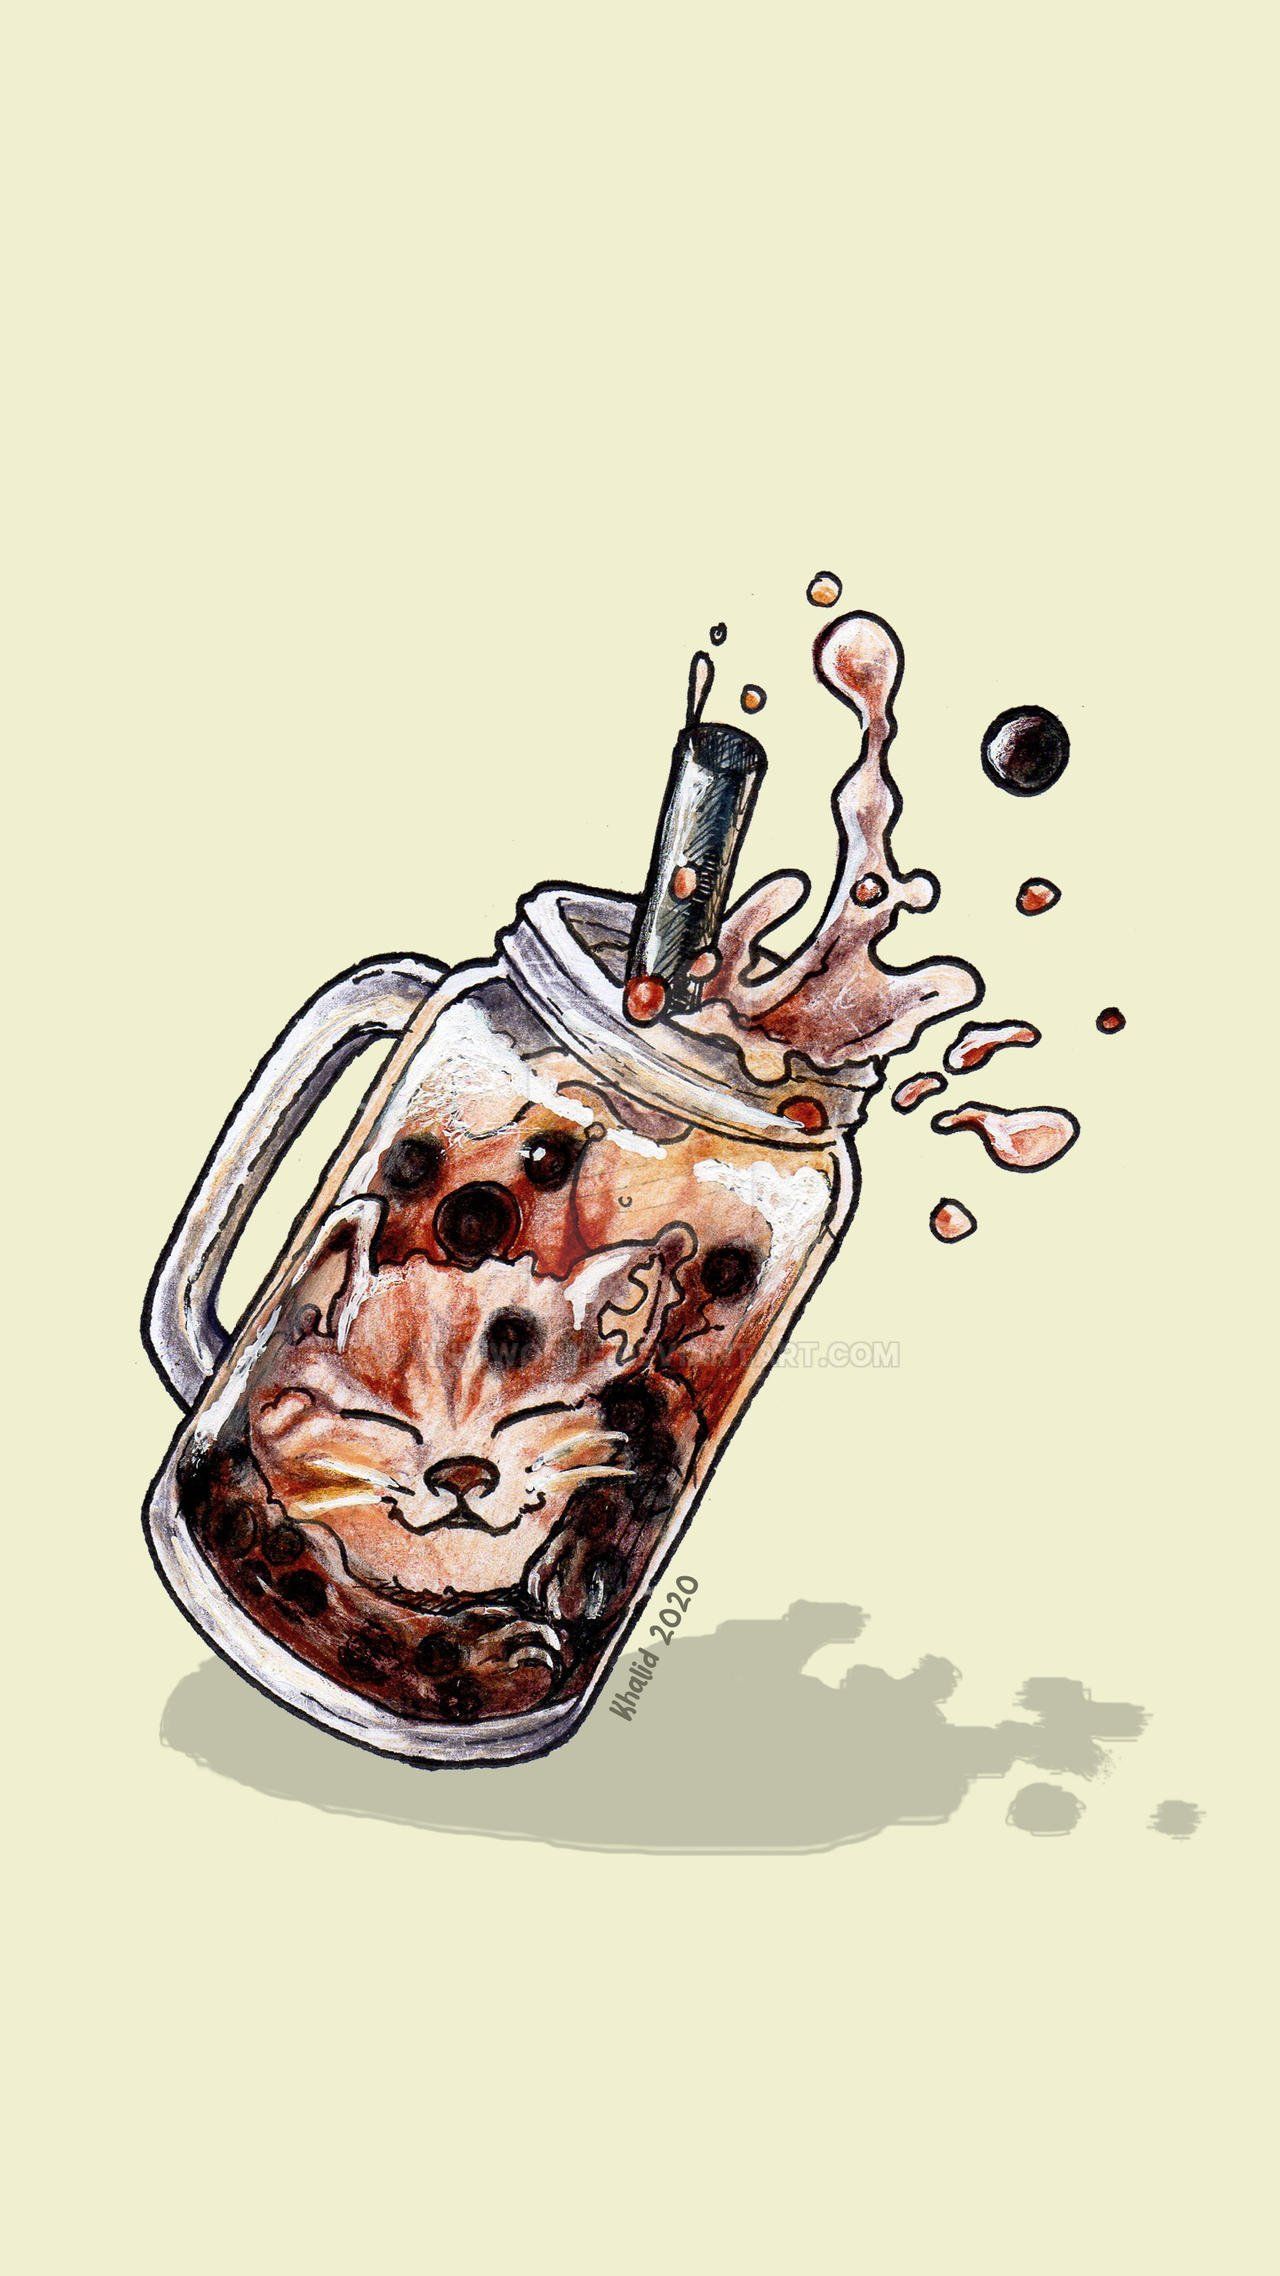 A Boba drink with a fox, a dog and a cat inside - Boba